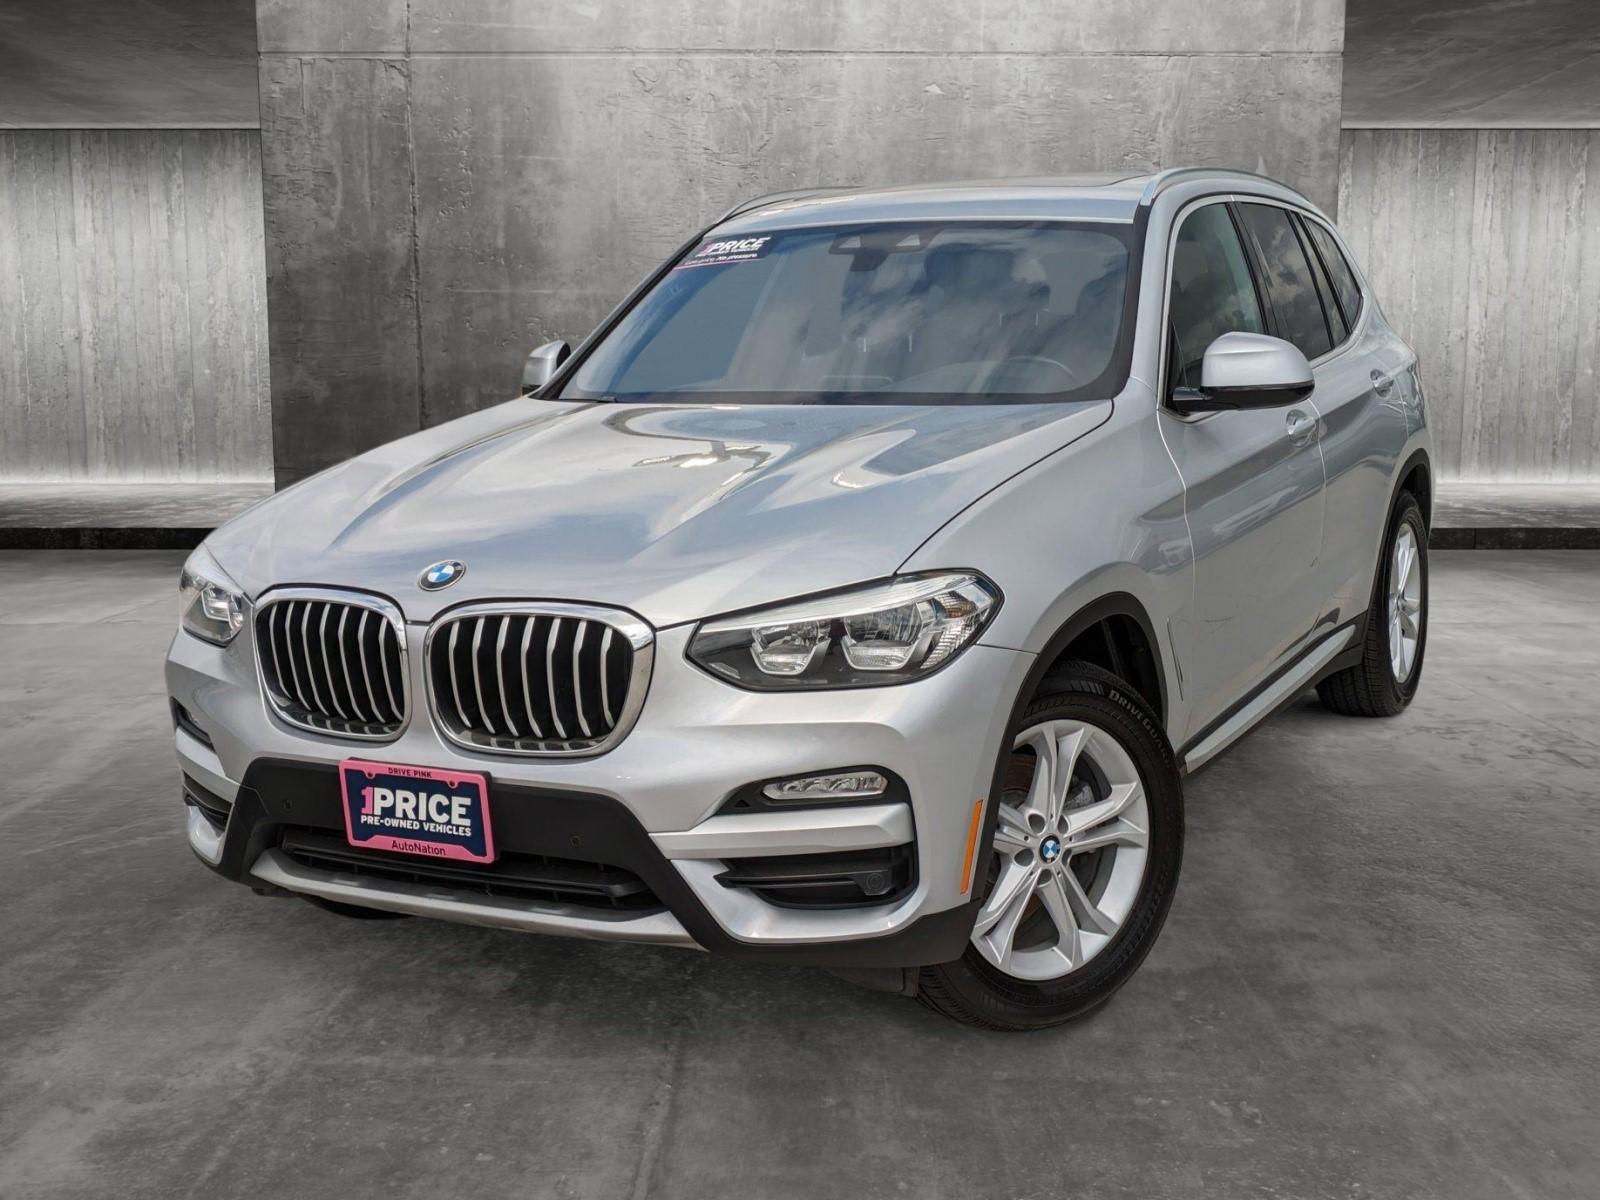 2019 BMW X3 xDrive30i Vehicle Photo in Rockville, MD 20852